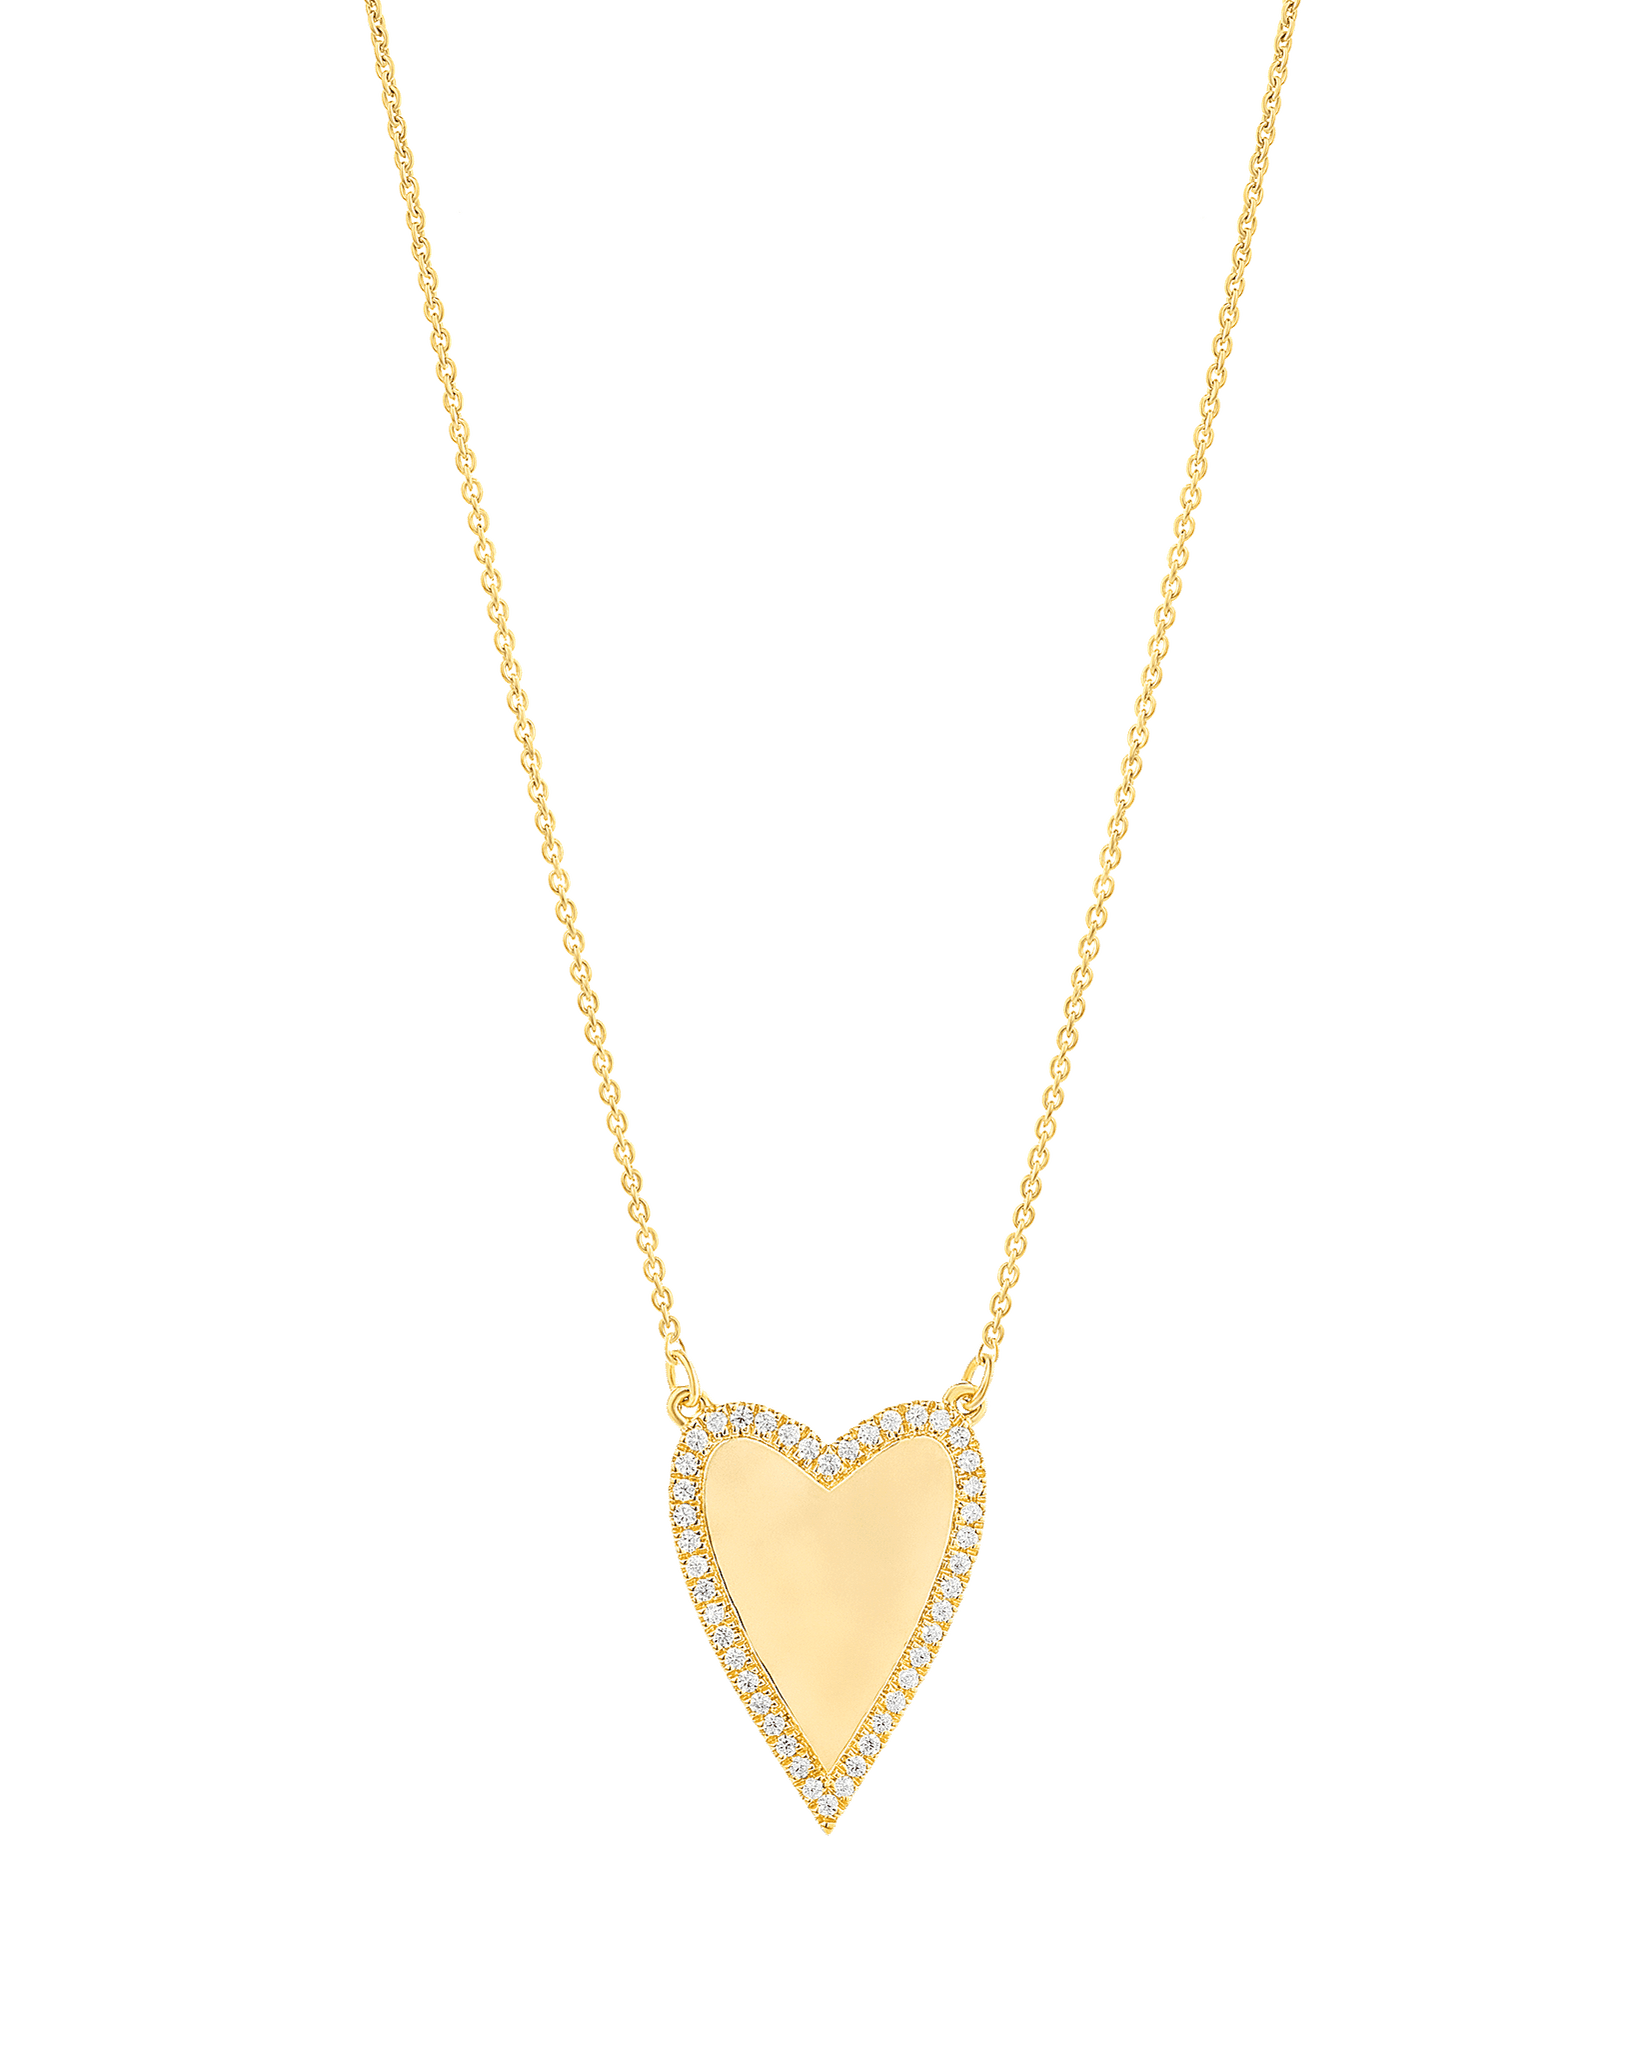 Outlined Heart Diamond Necklace - 14K White Gold Necklaces magal-dev 